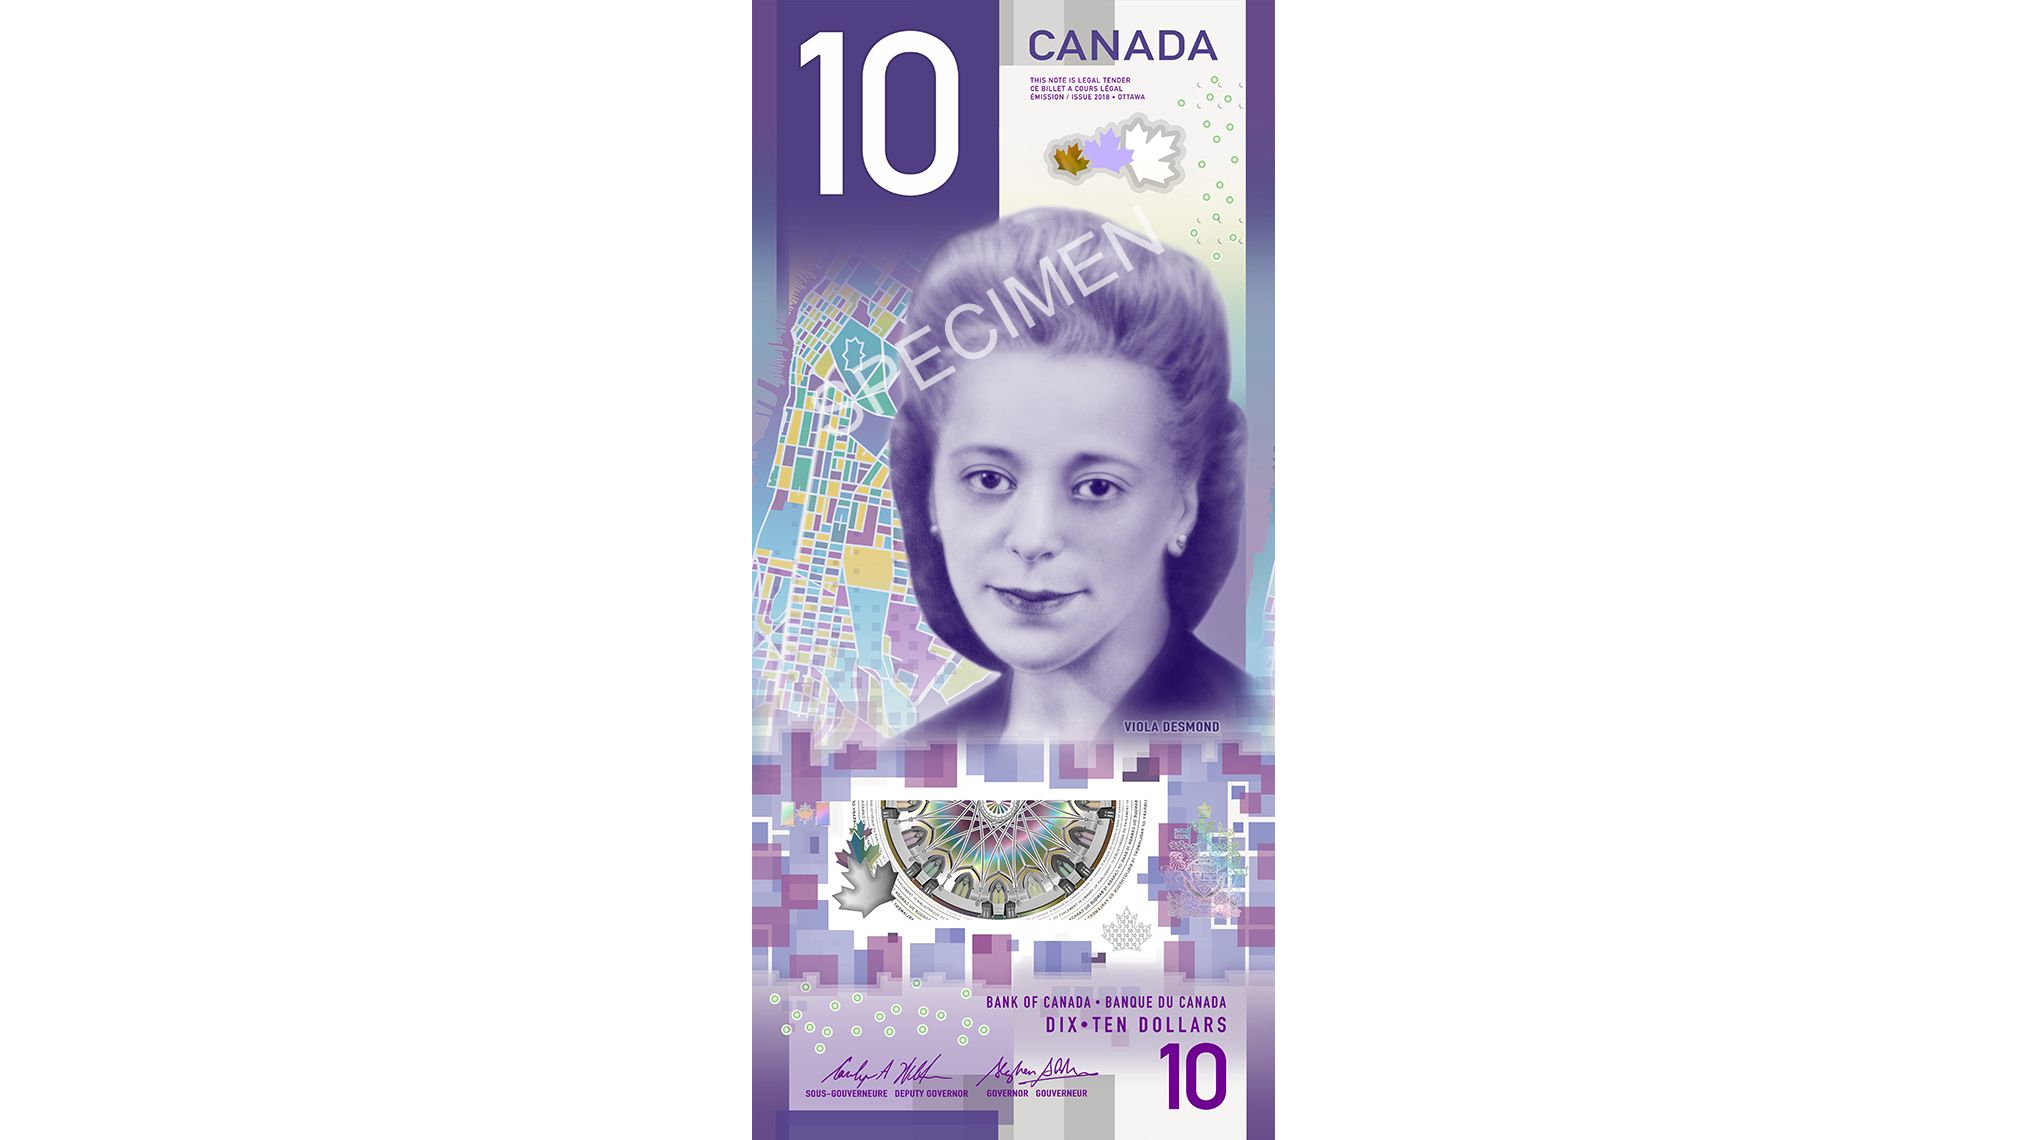 She was Canada's Rosa Parks. Now she's the first black person to appear on  its currency